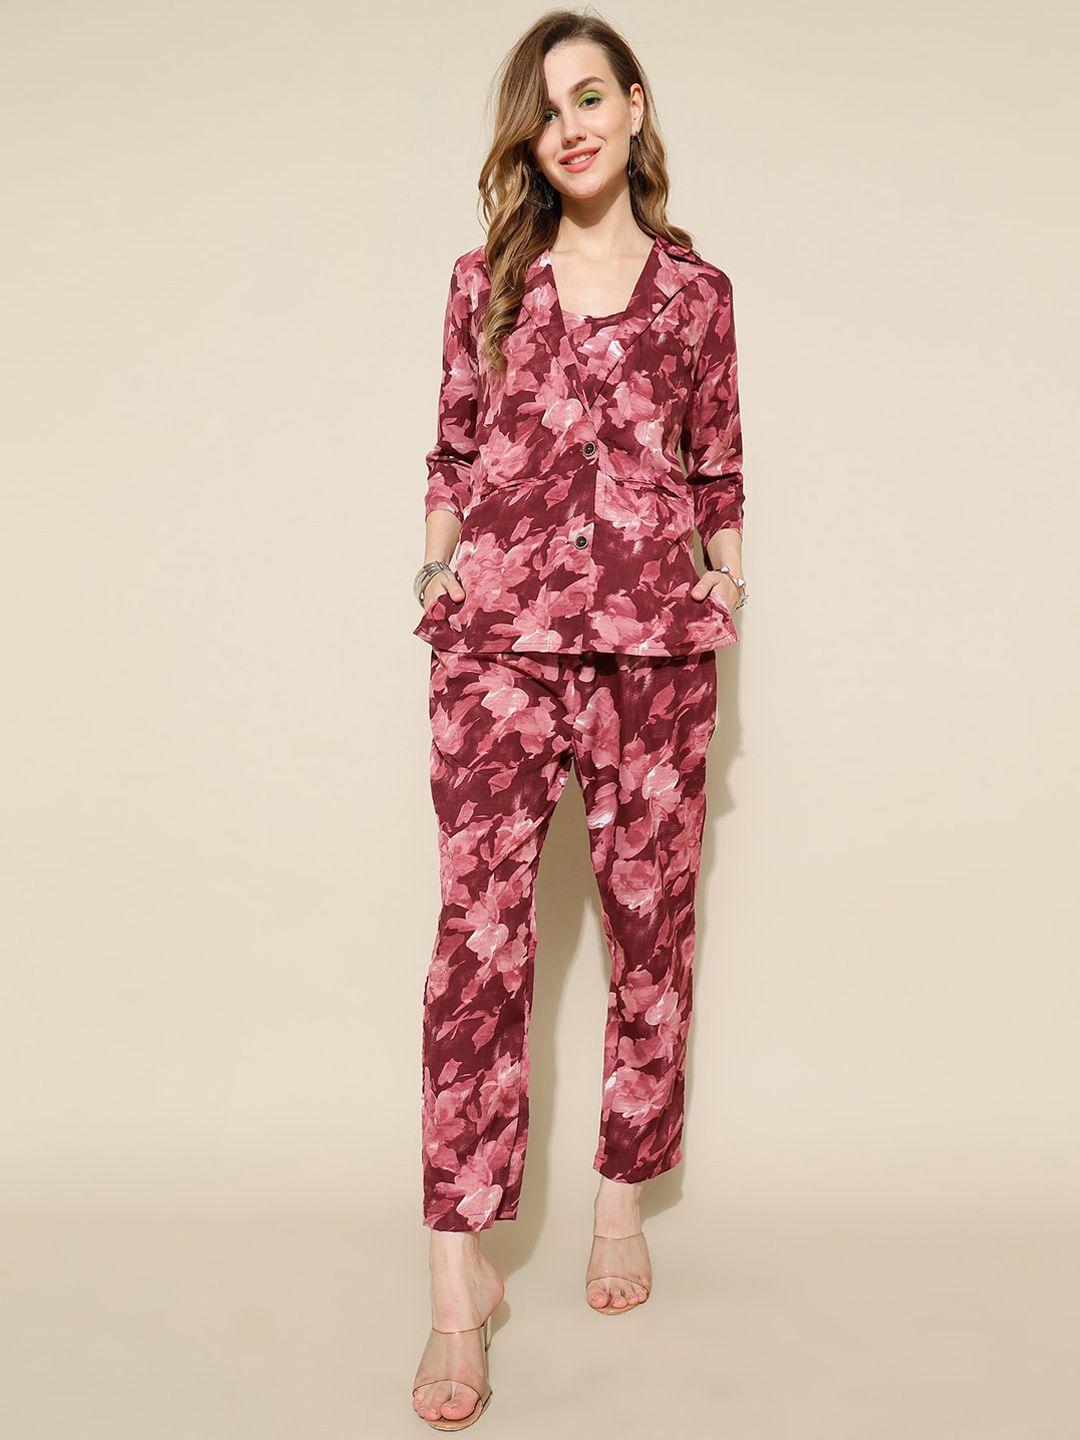 kalini floral printed top with blazer & trousers